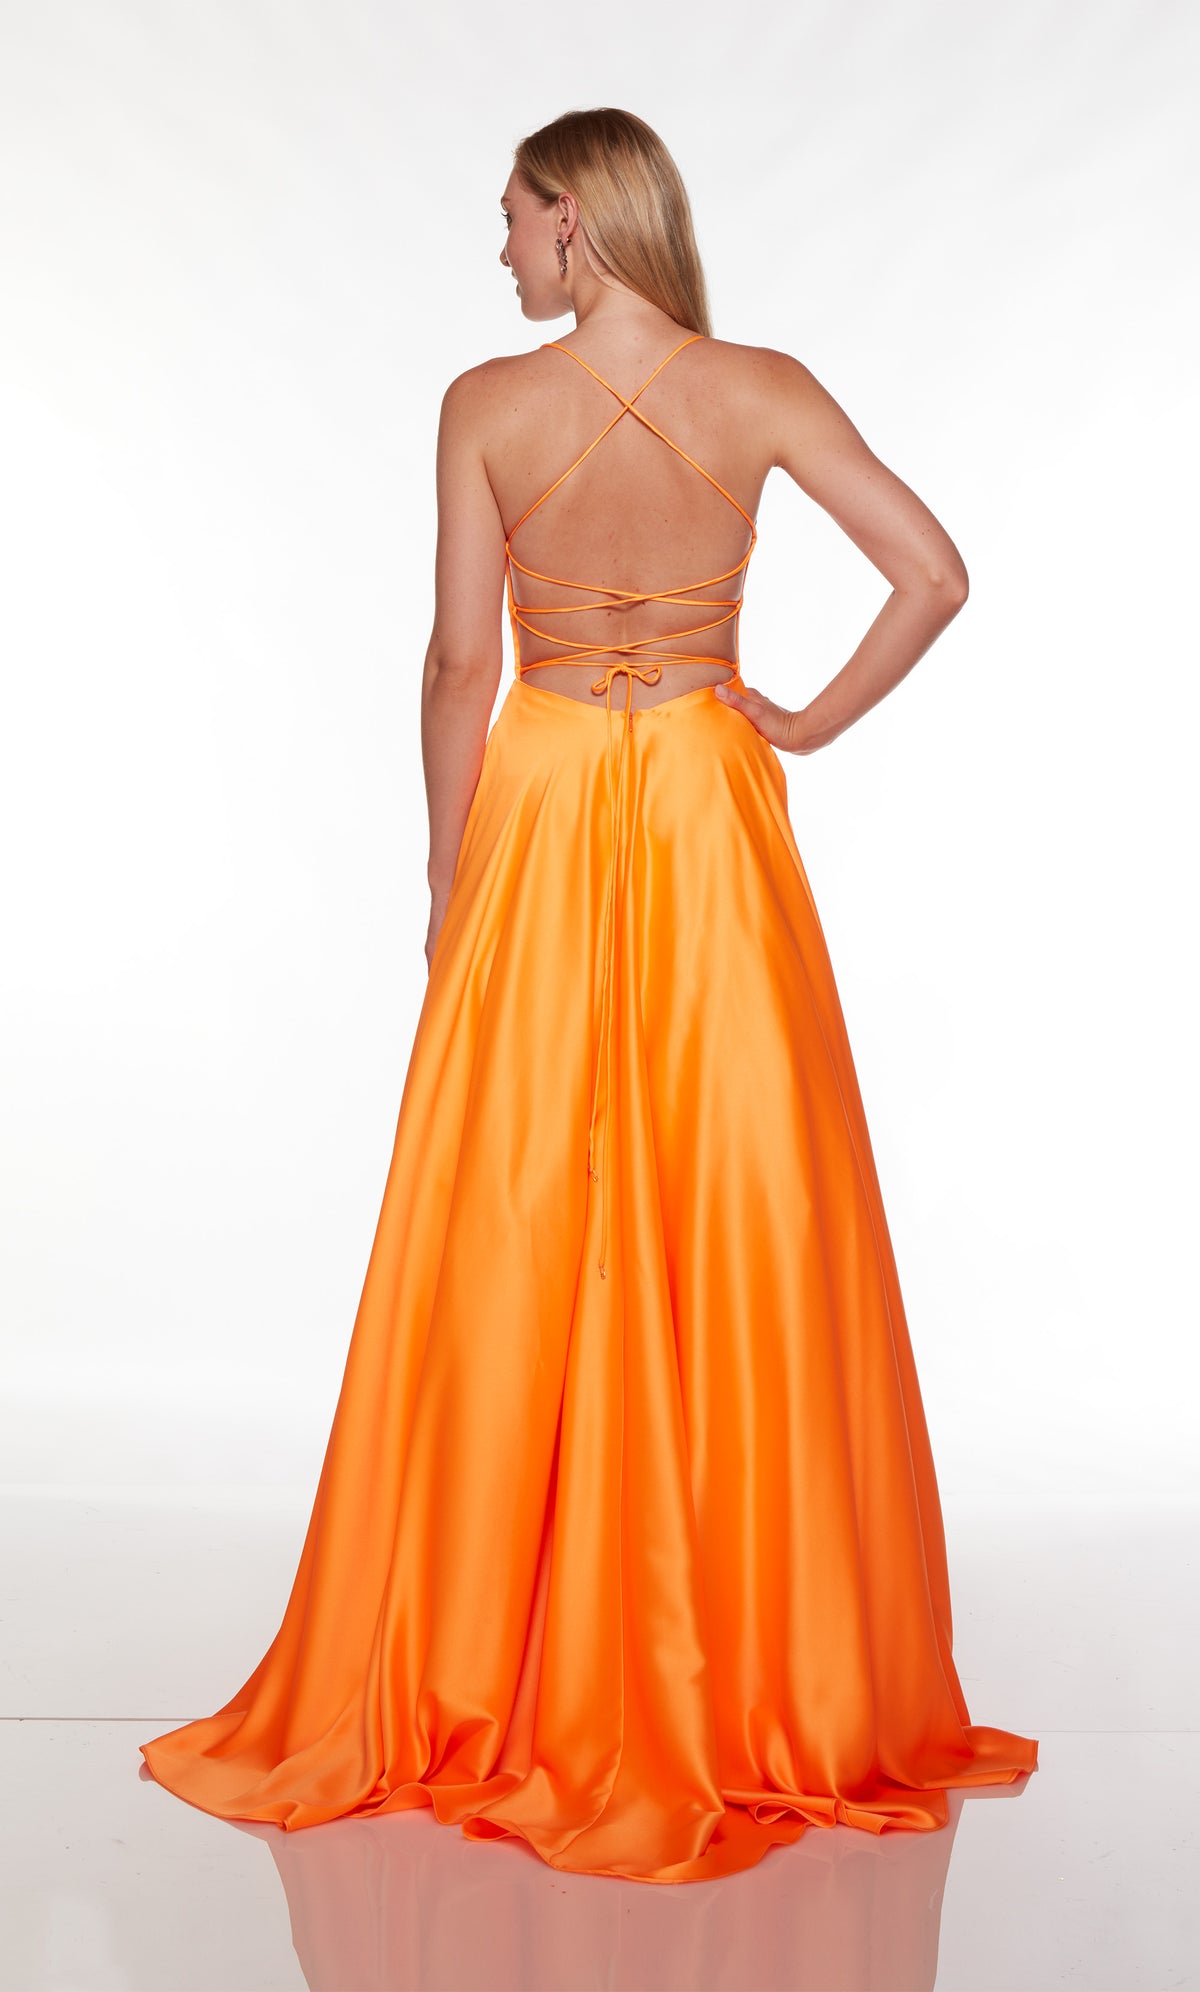 Long orange dress with a strappy, lace-up back and train.